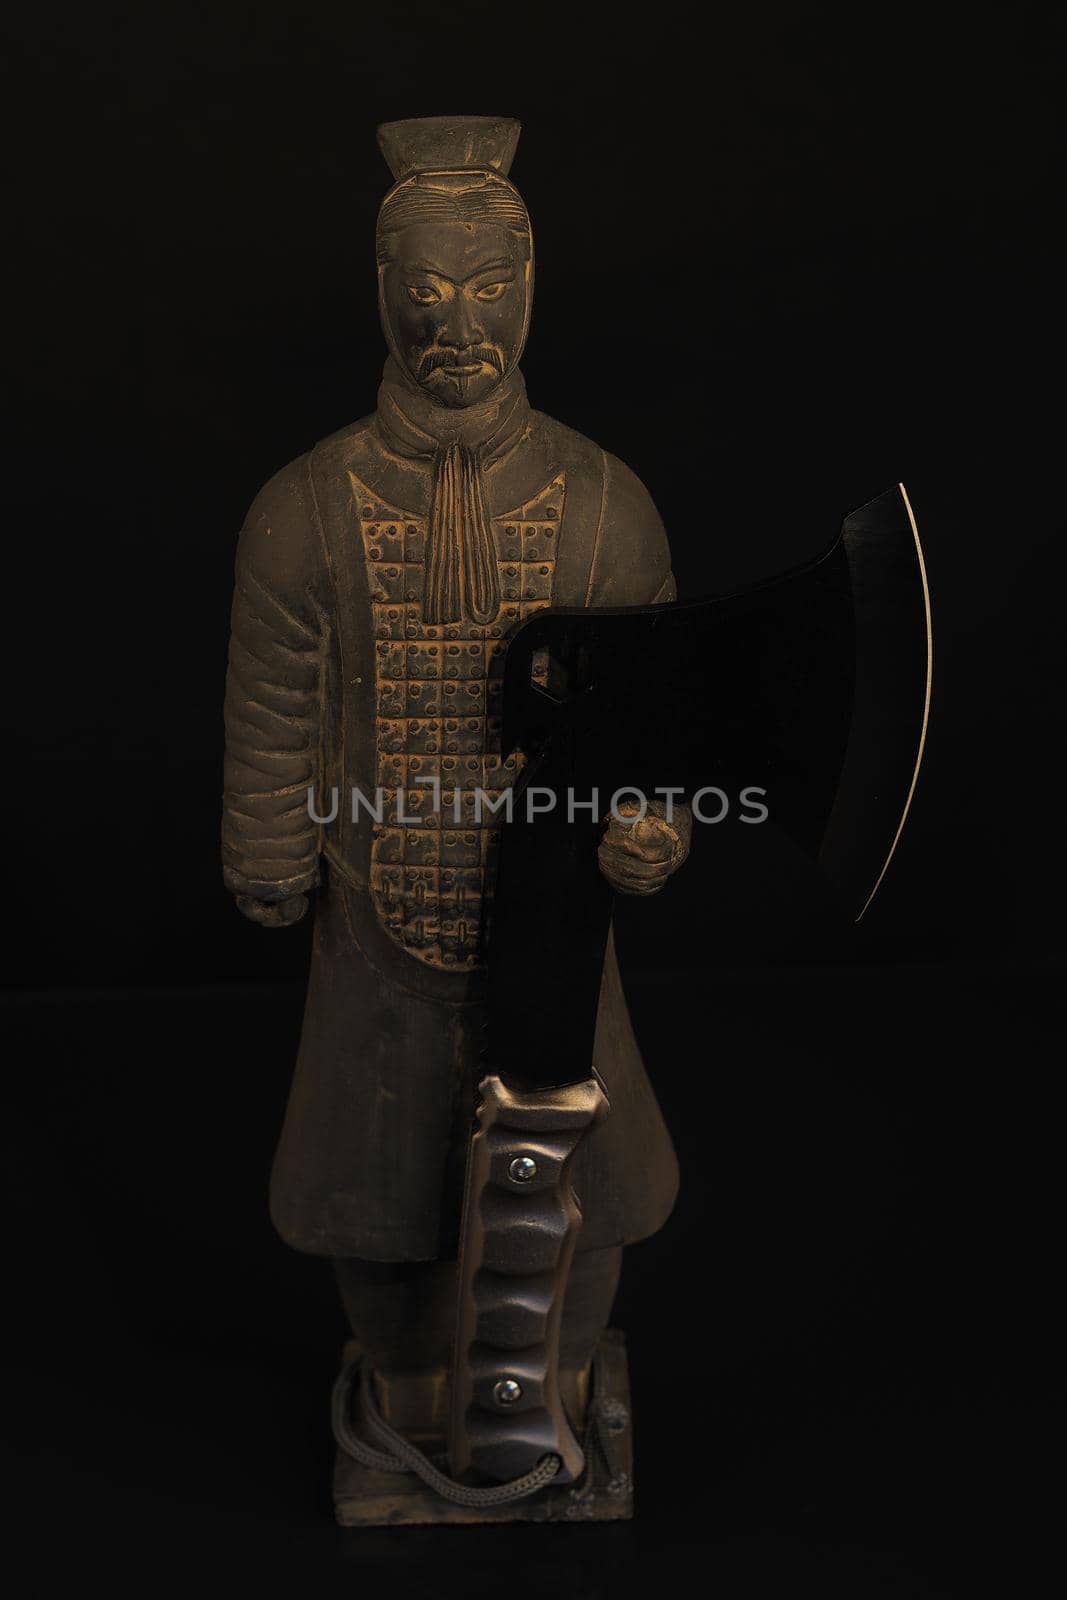 A Chinese soldier. A figurine or a statuette of a Chinese warrior with an axe. by Olga26